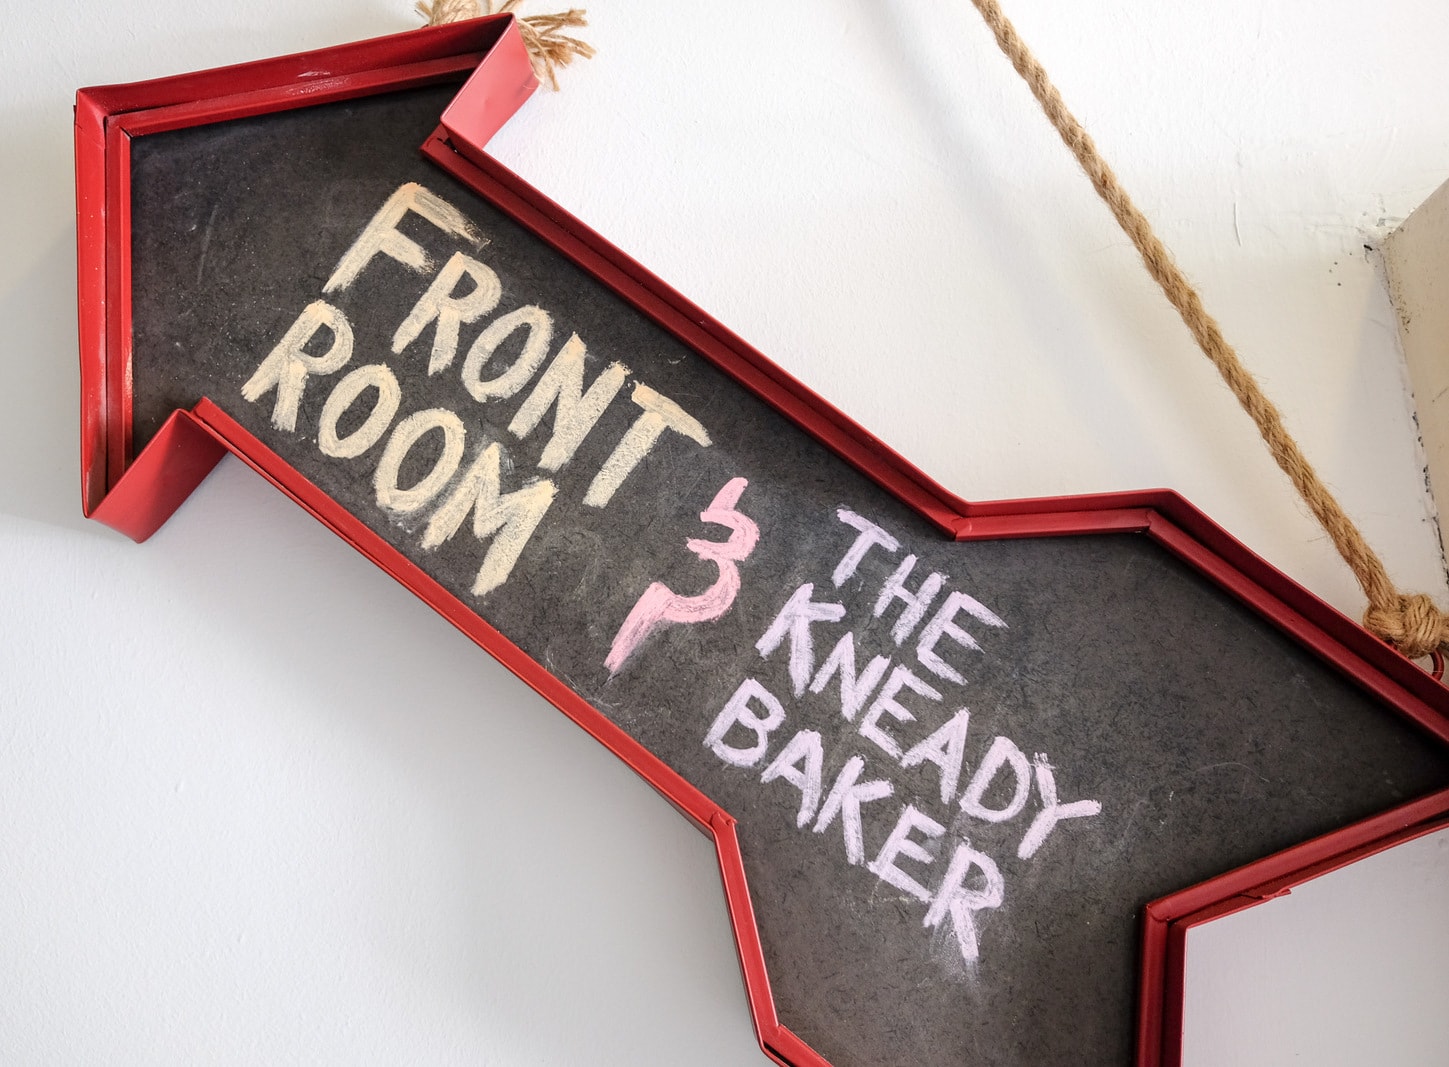 The & baker kneady room front Loading interface